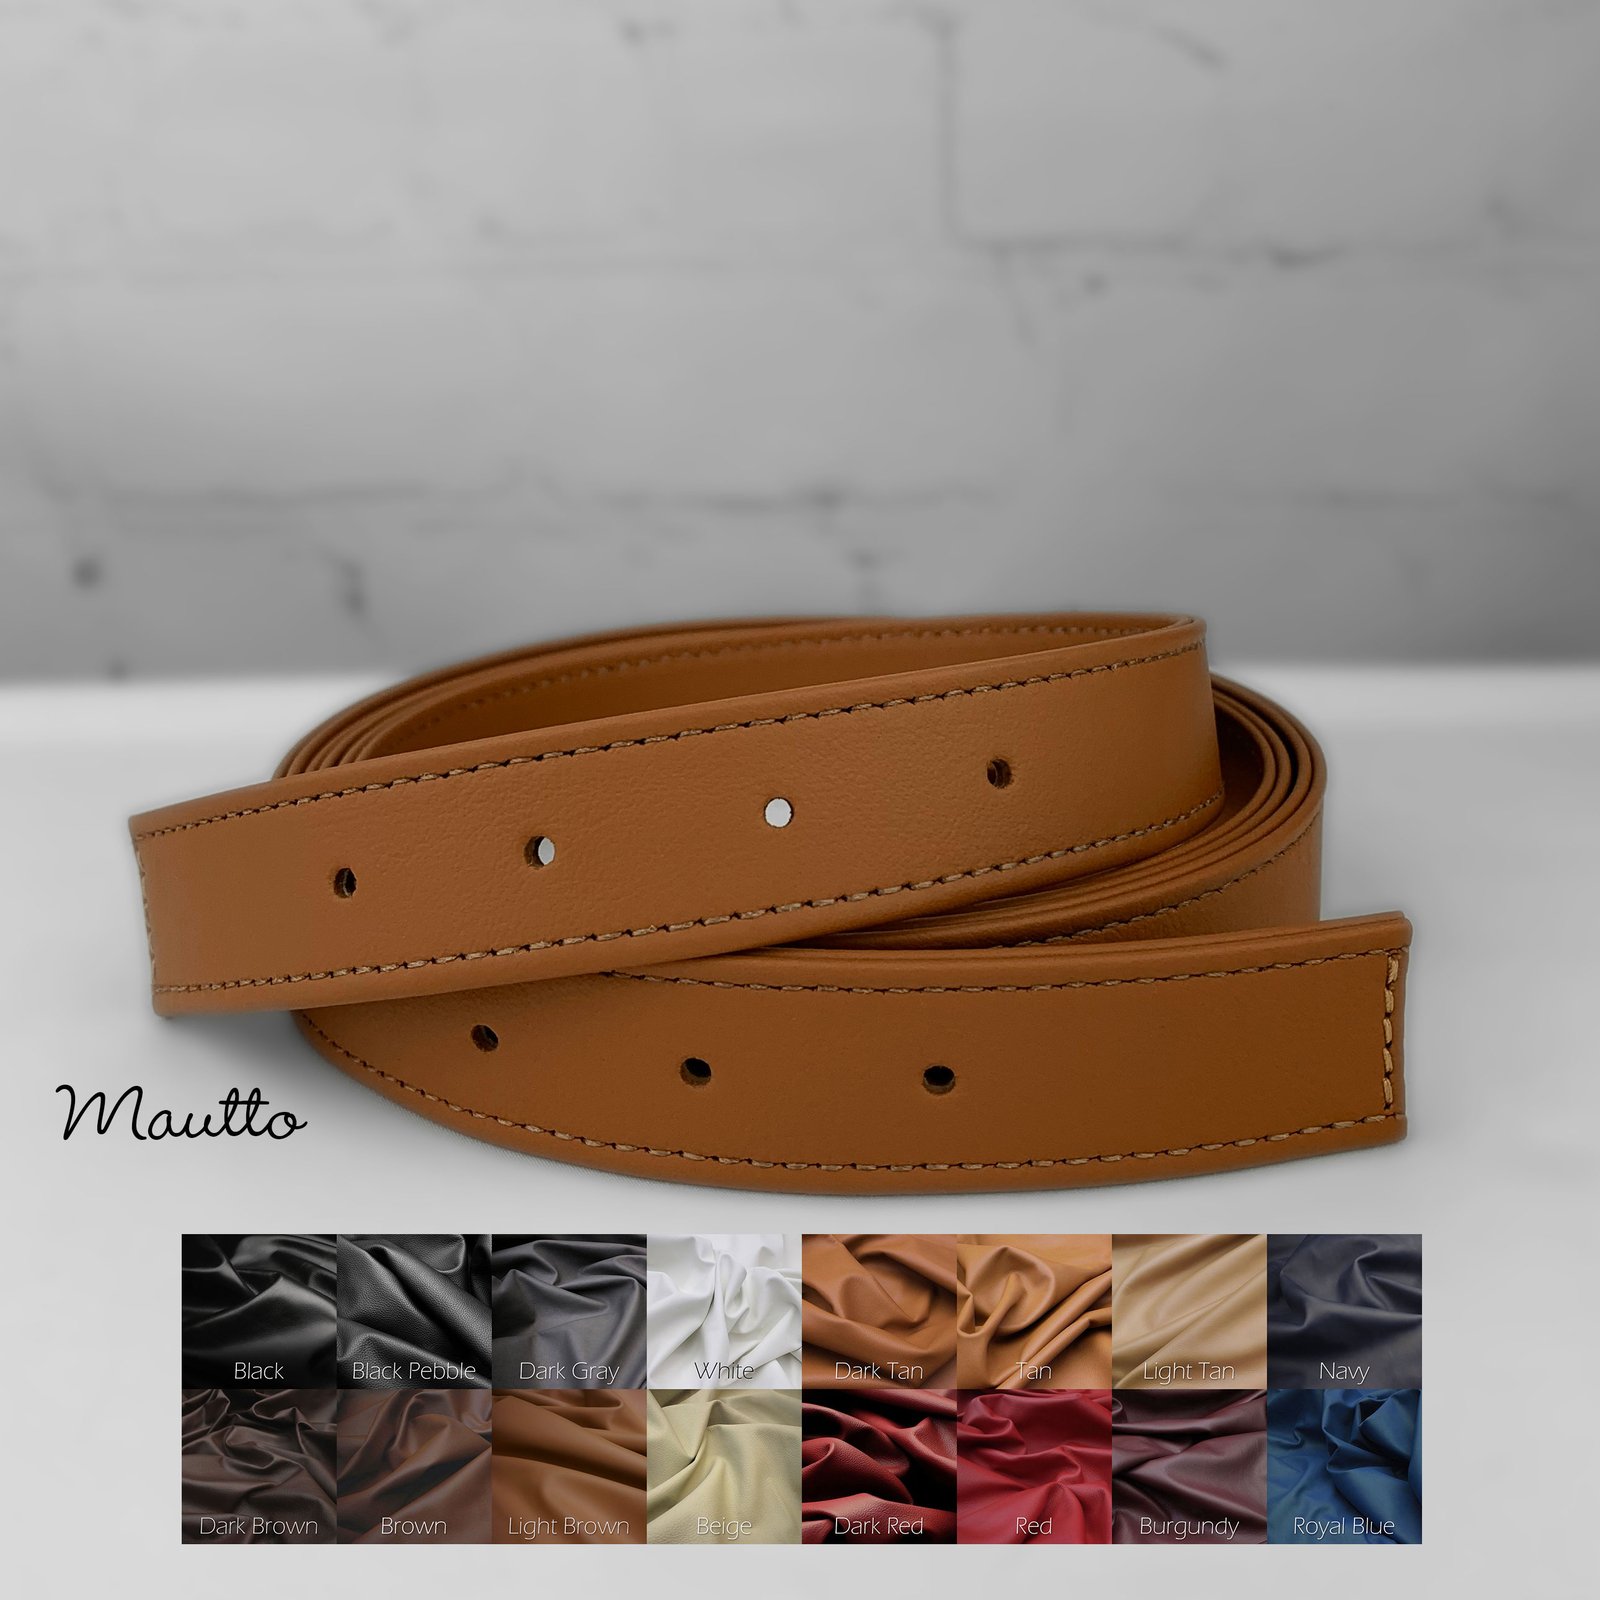 Adjustable Length Leather Strap - Punched Holes on Ends - 1